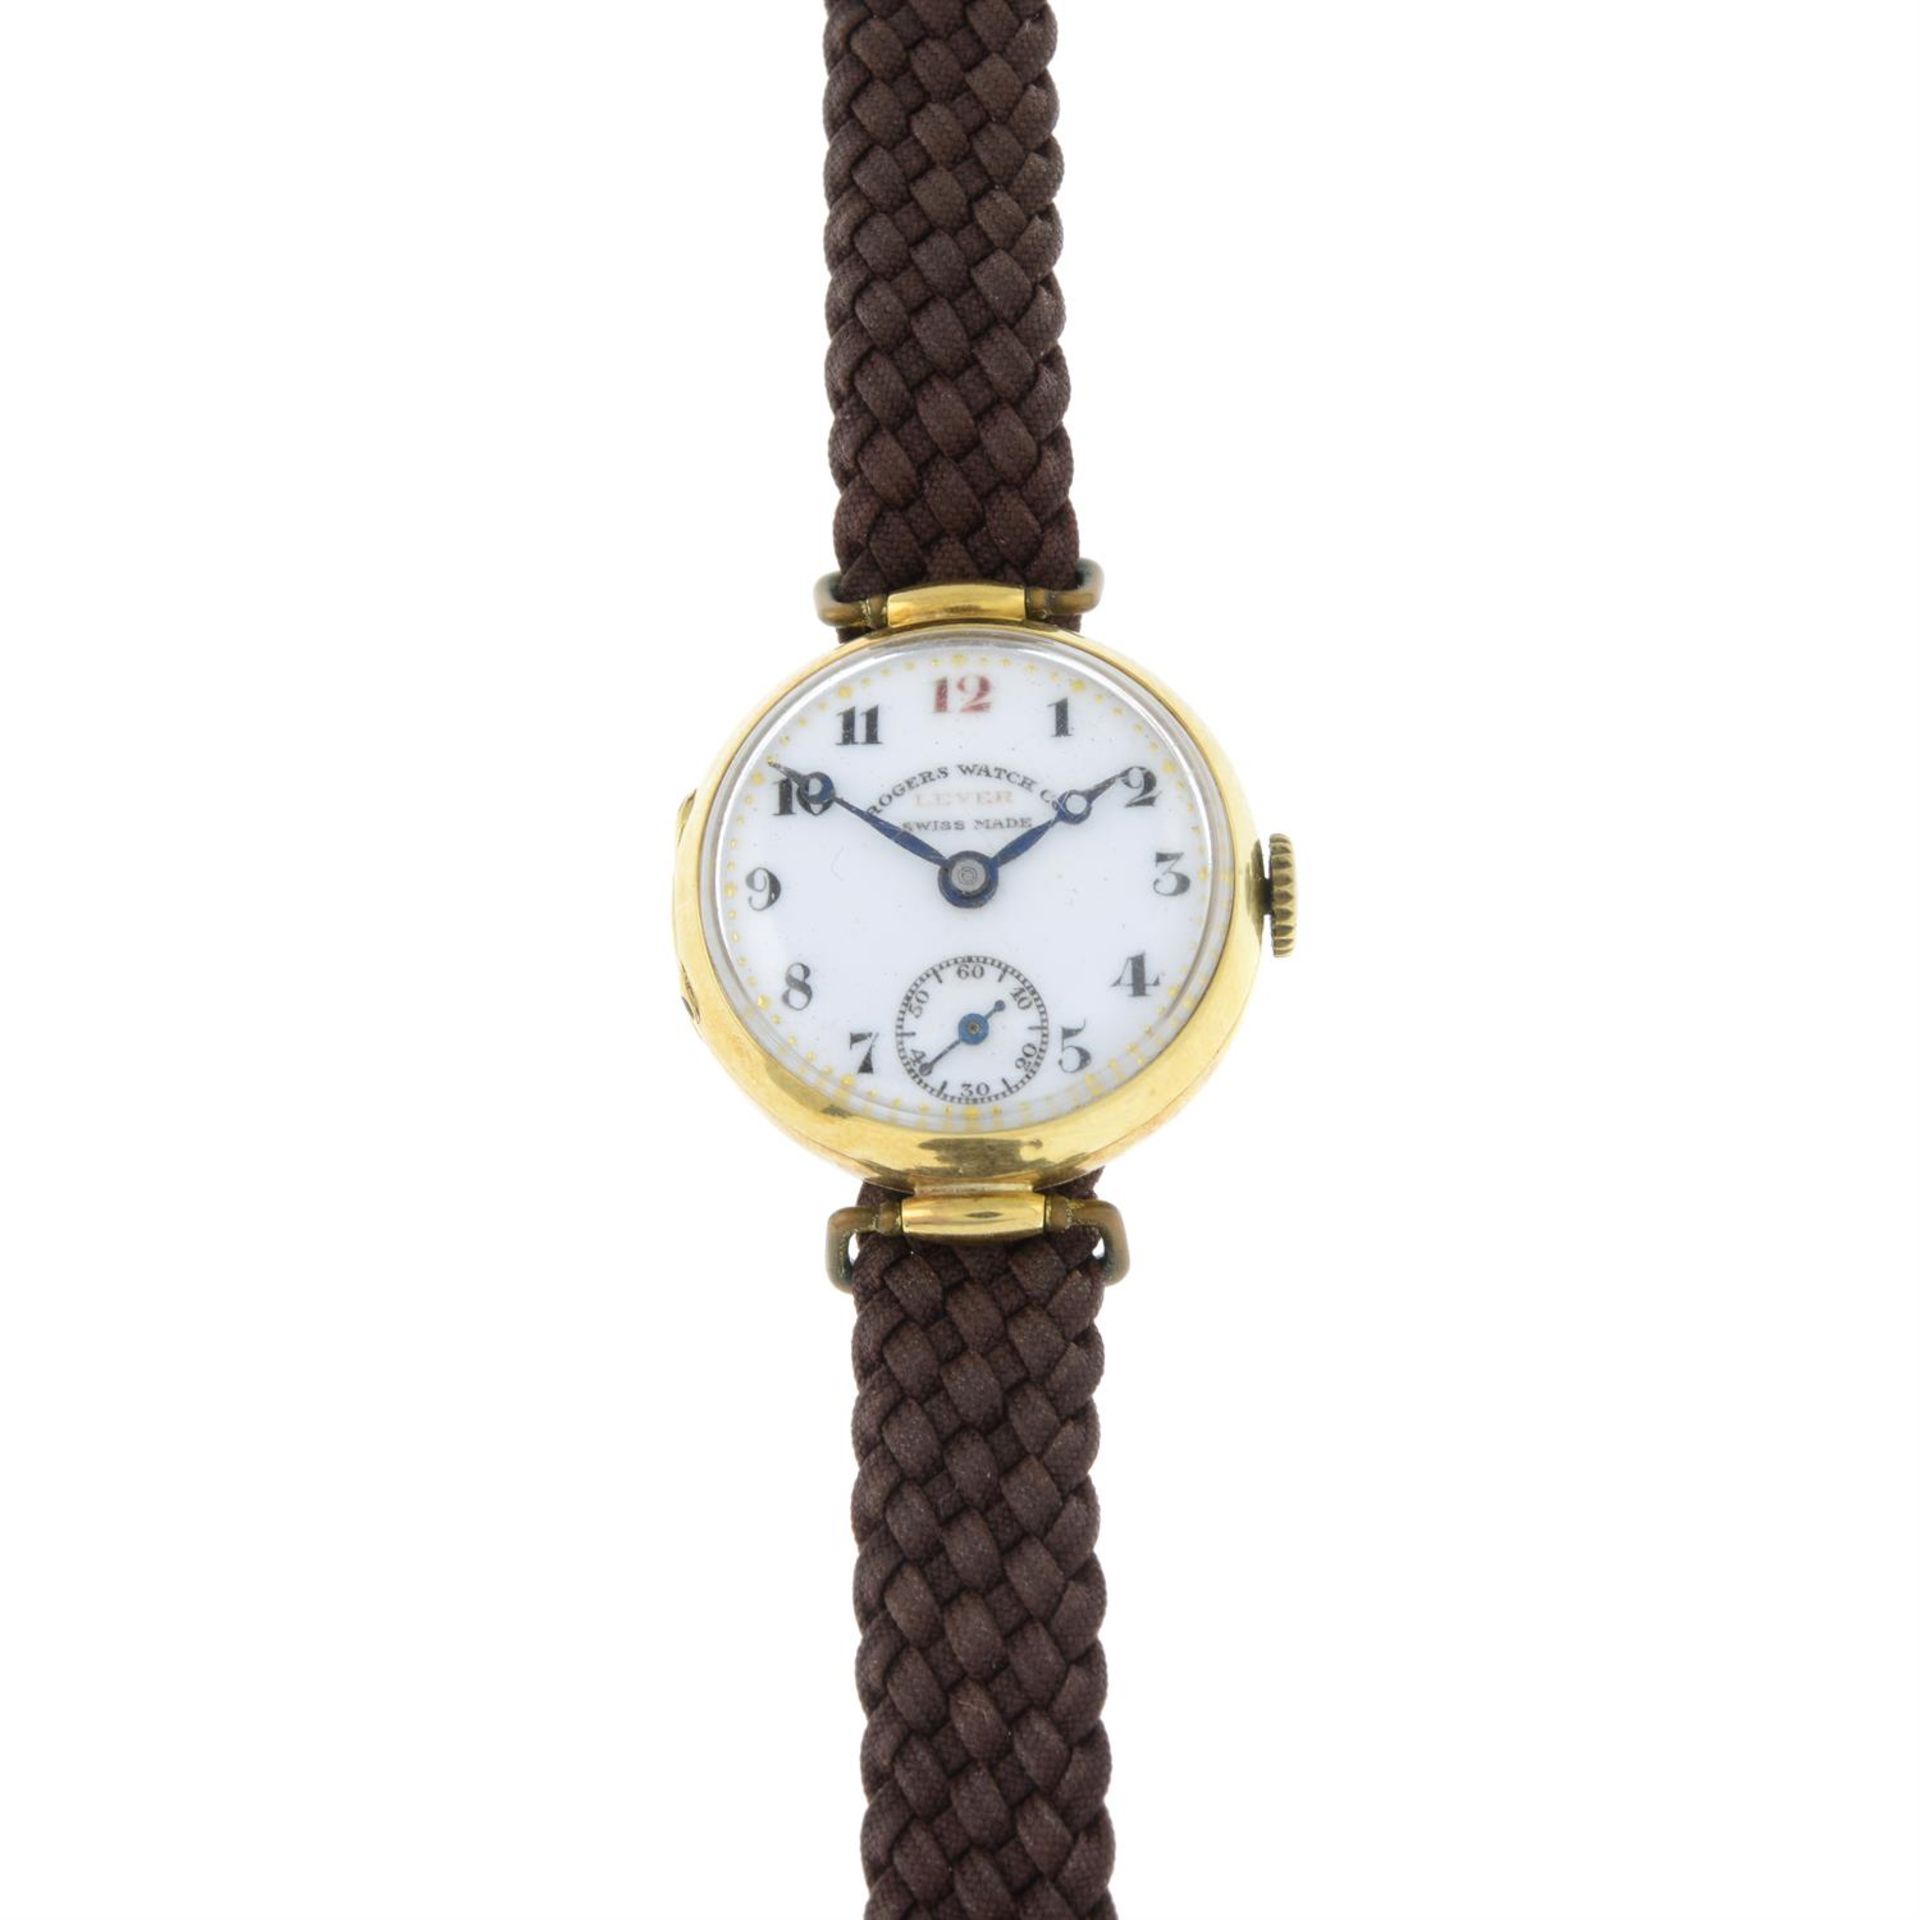 A cocktail watch, with woven strap.